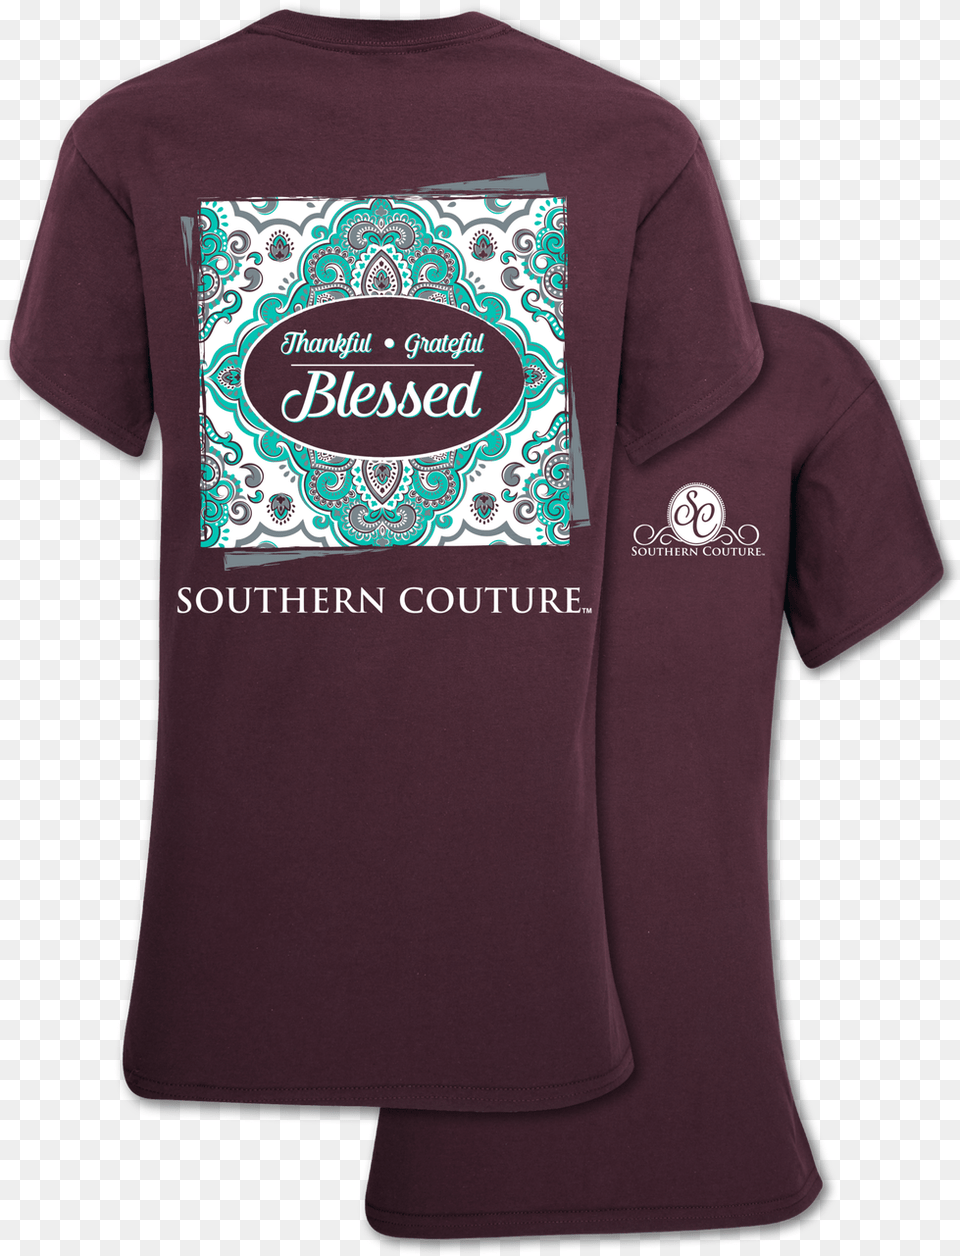 Southern Couture Thankful Grateful Blessed Southern Couture, Clothing, Maroon, T-shirt, Shirt Free Png